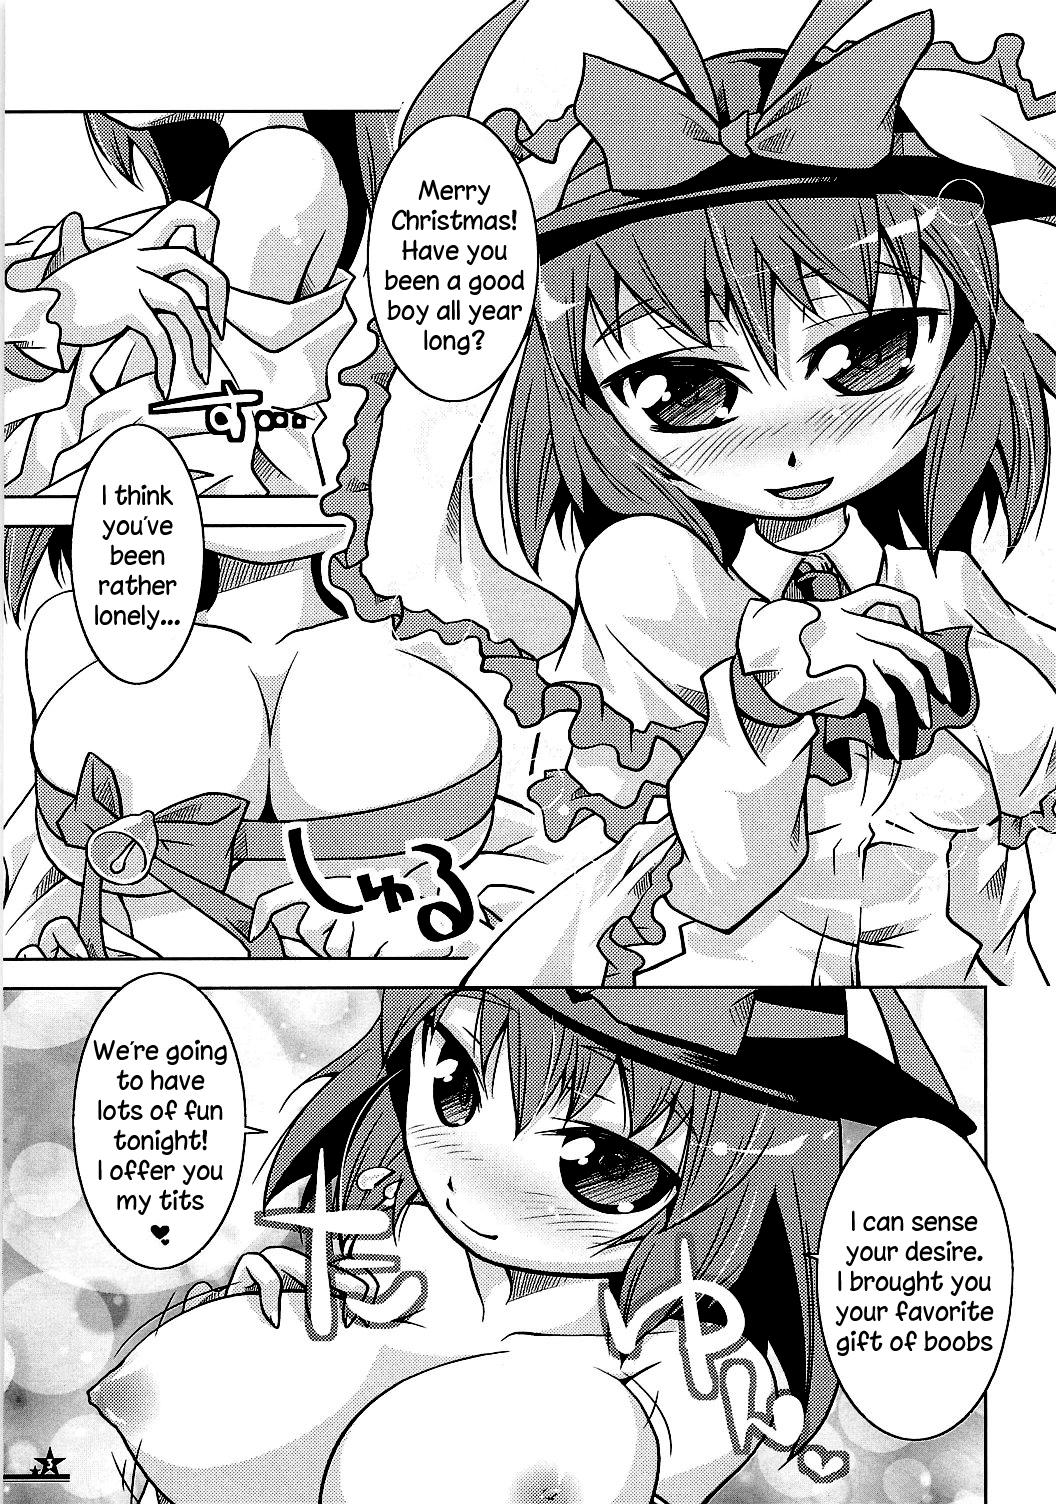 Pack Christmas Night Fever - Touhou project Leaked - Page 2